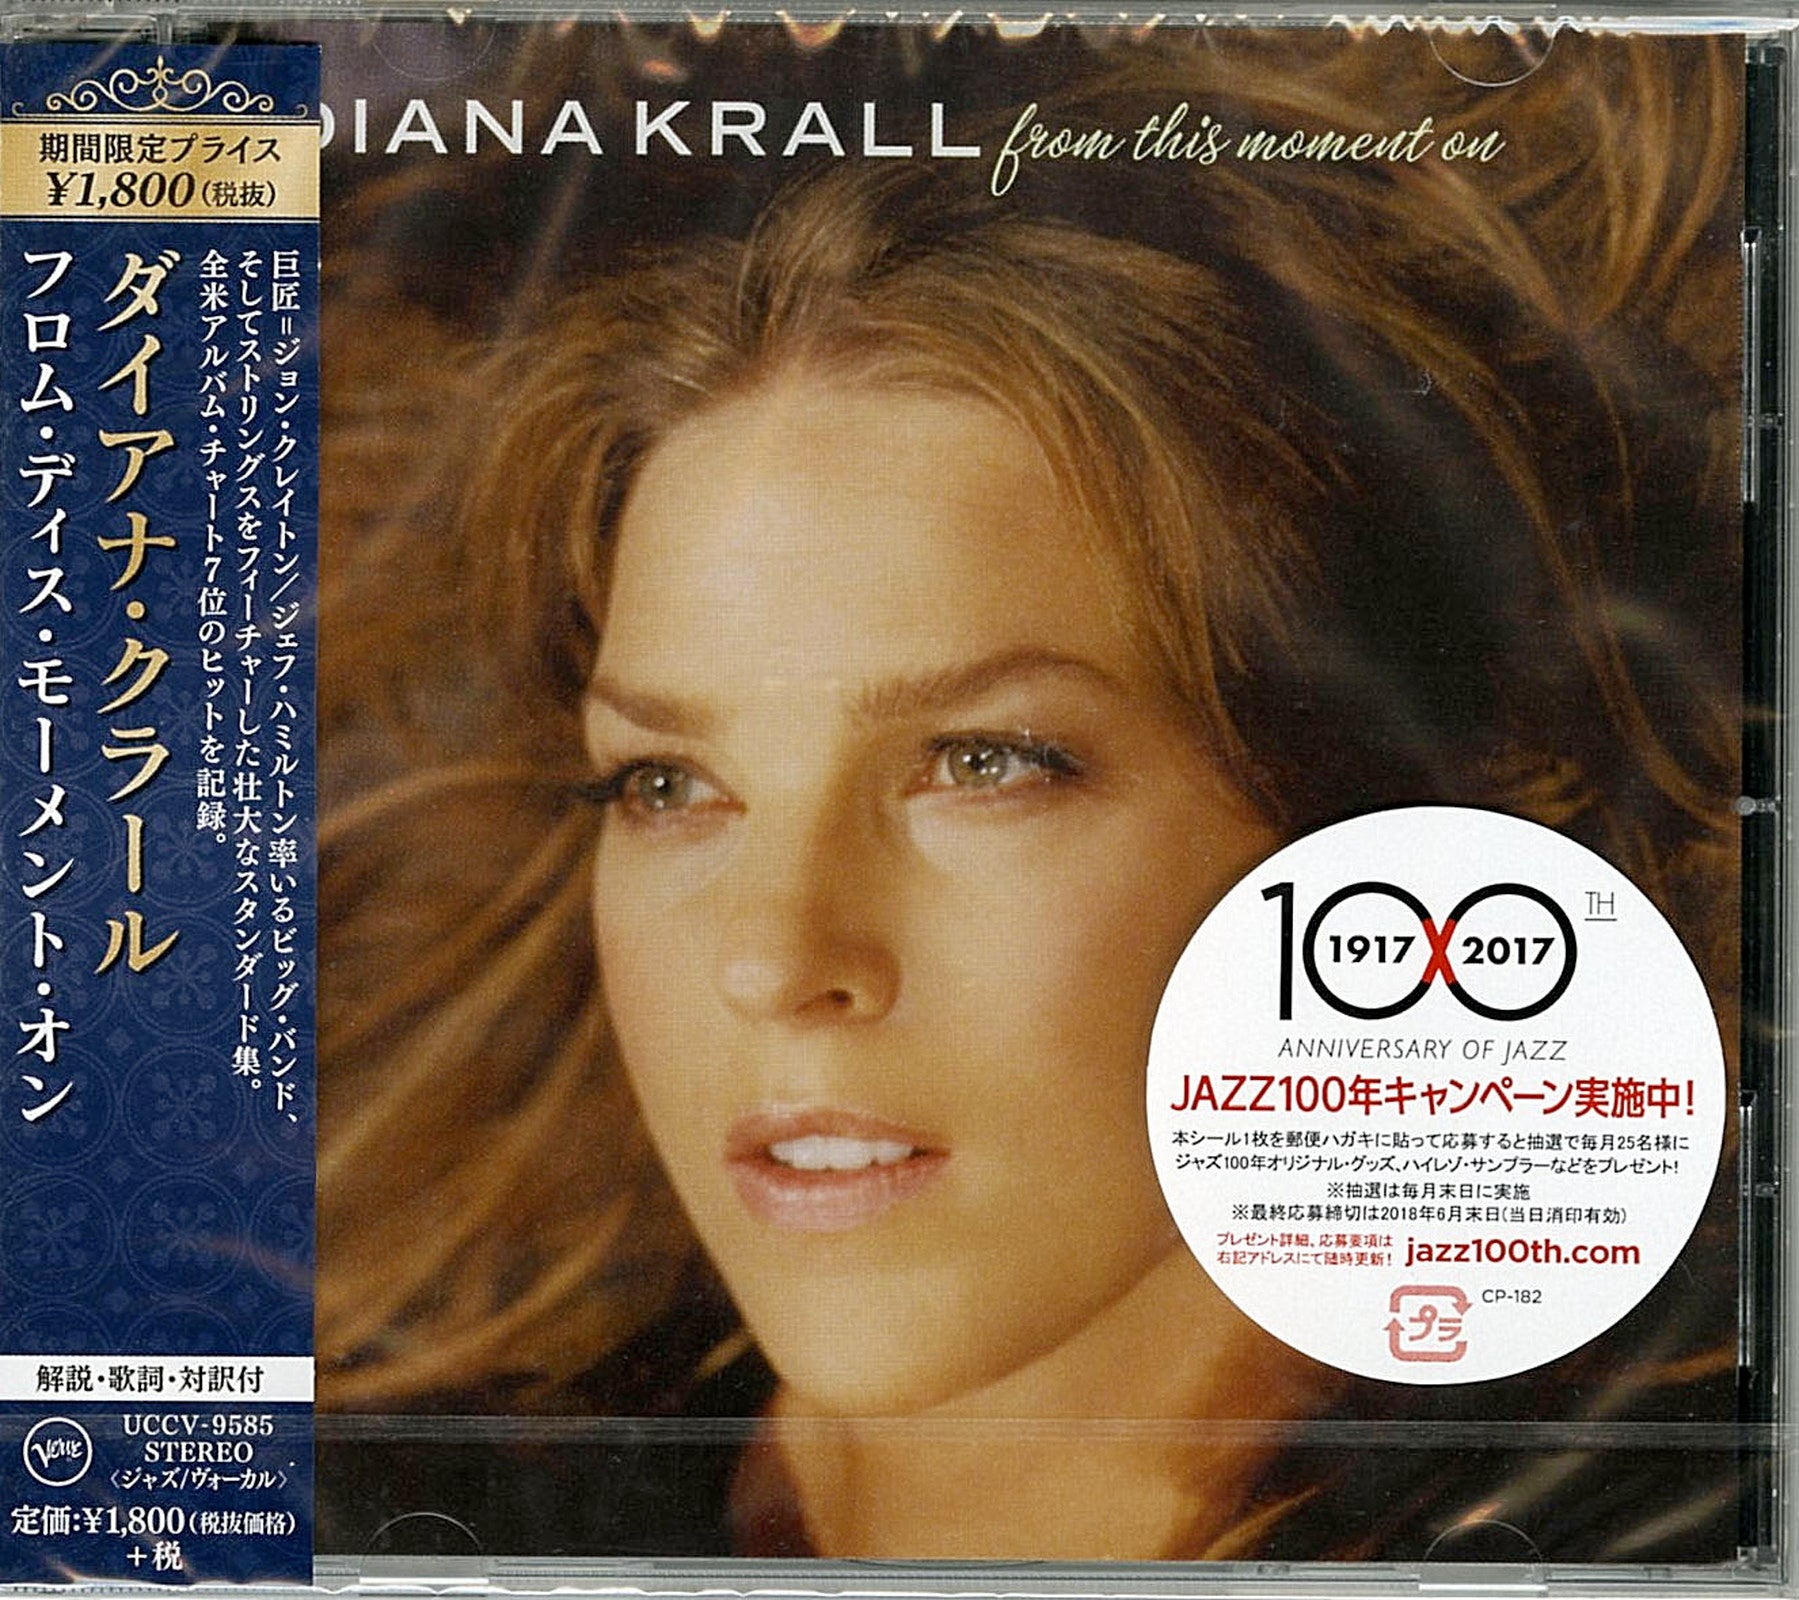 Only)　Vinyl　Edition　Moment　Japan　This　CDs　Krall　Diana　–　International　From　On(Limited　Store